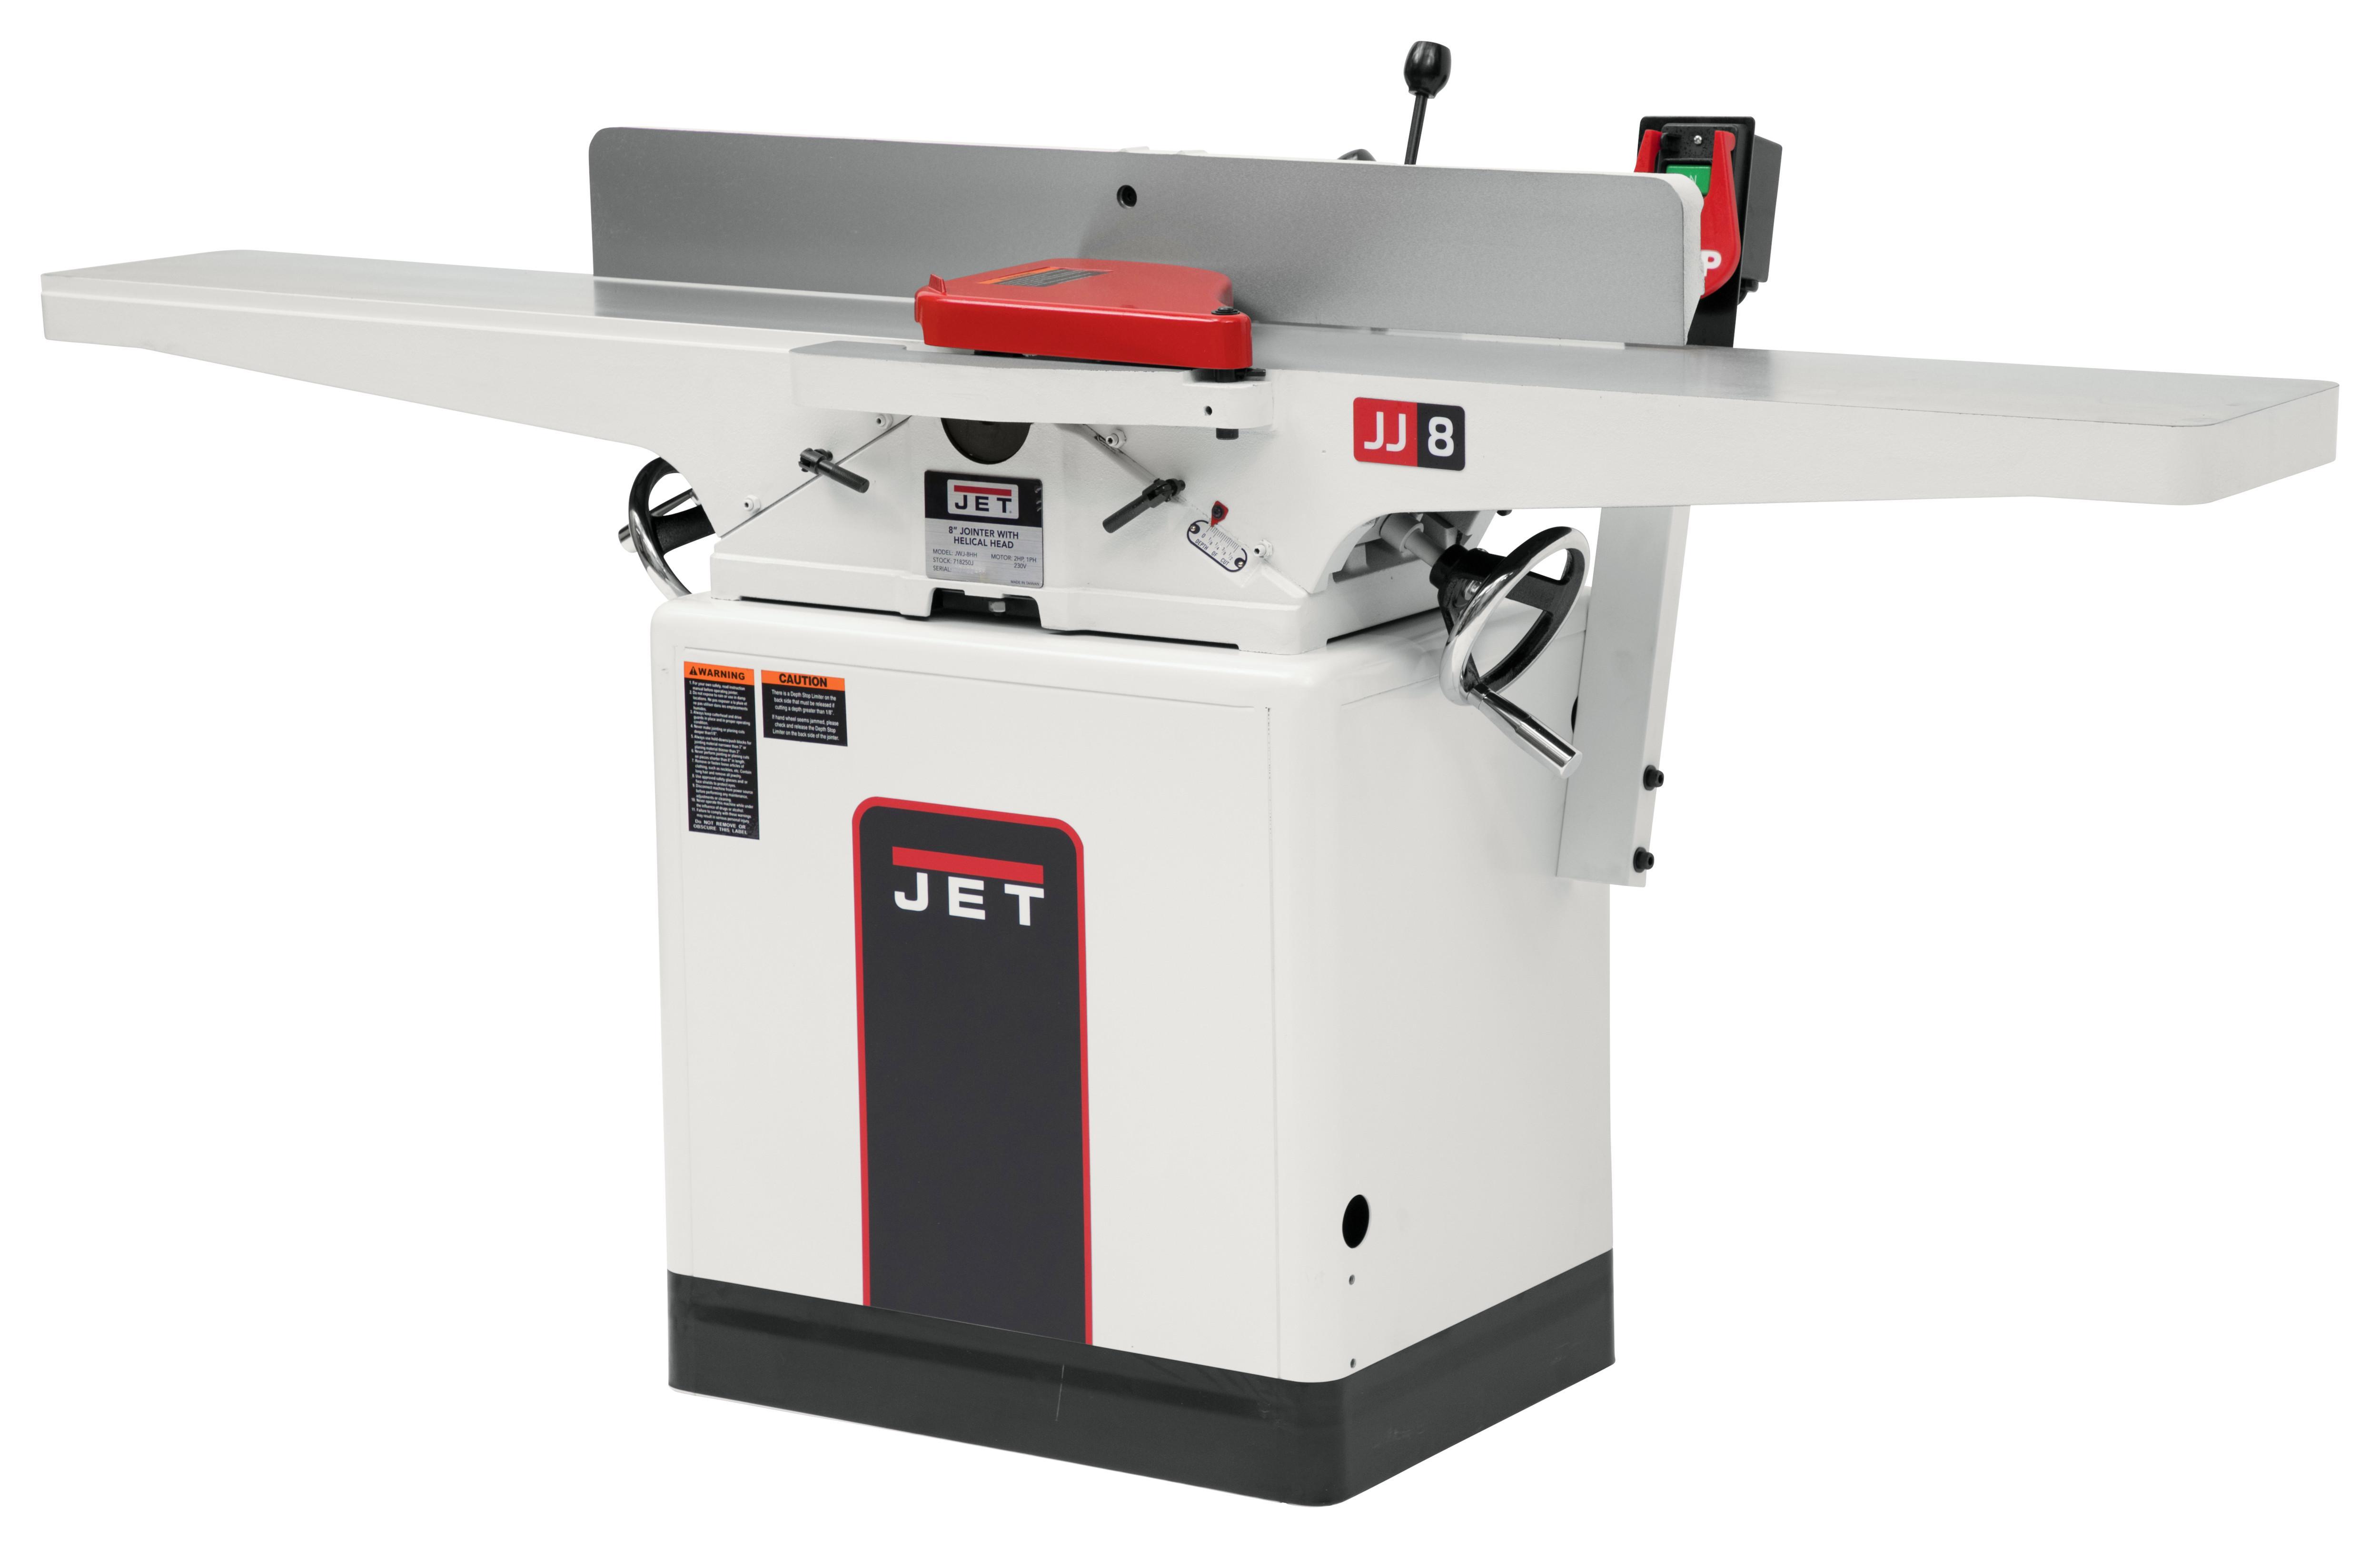 718250K JWJ-8HH, 8" Helical Head Jointer, 2HP, 1PH, 230V